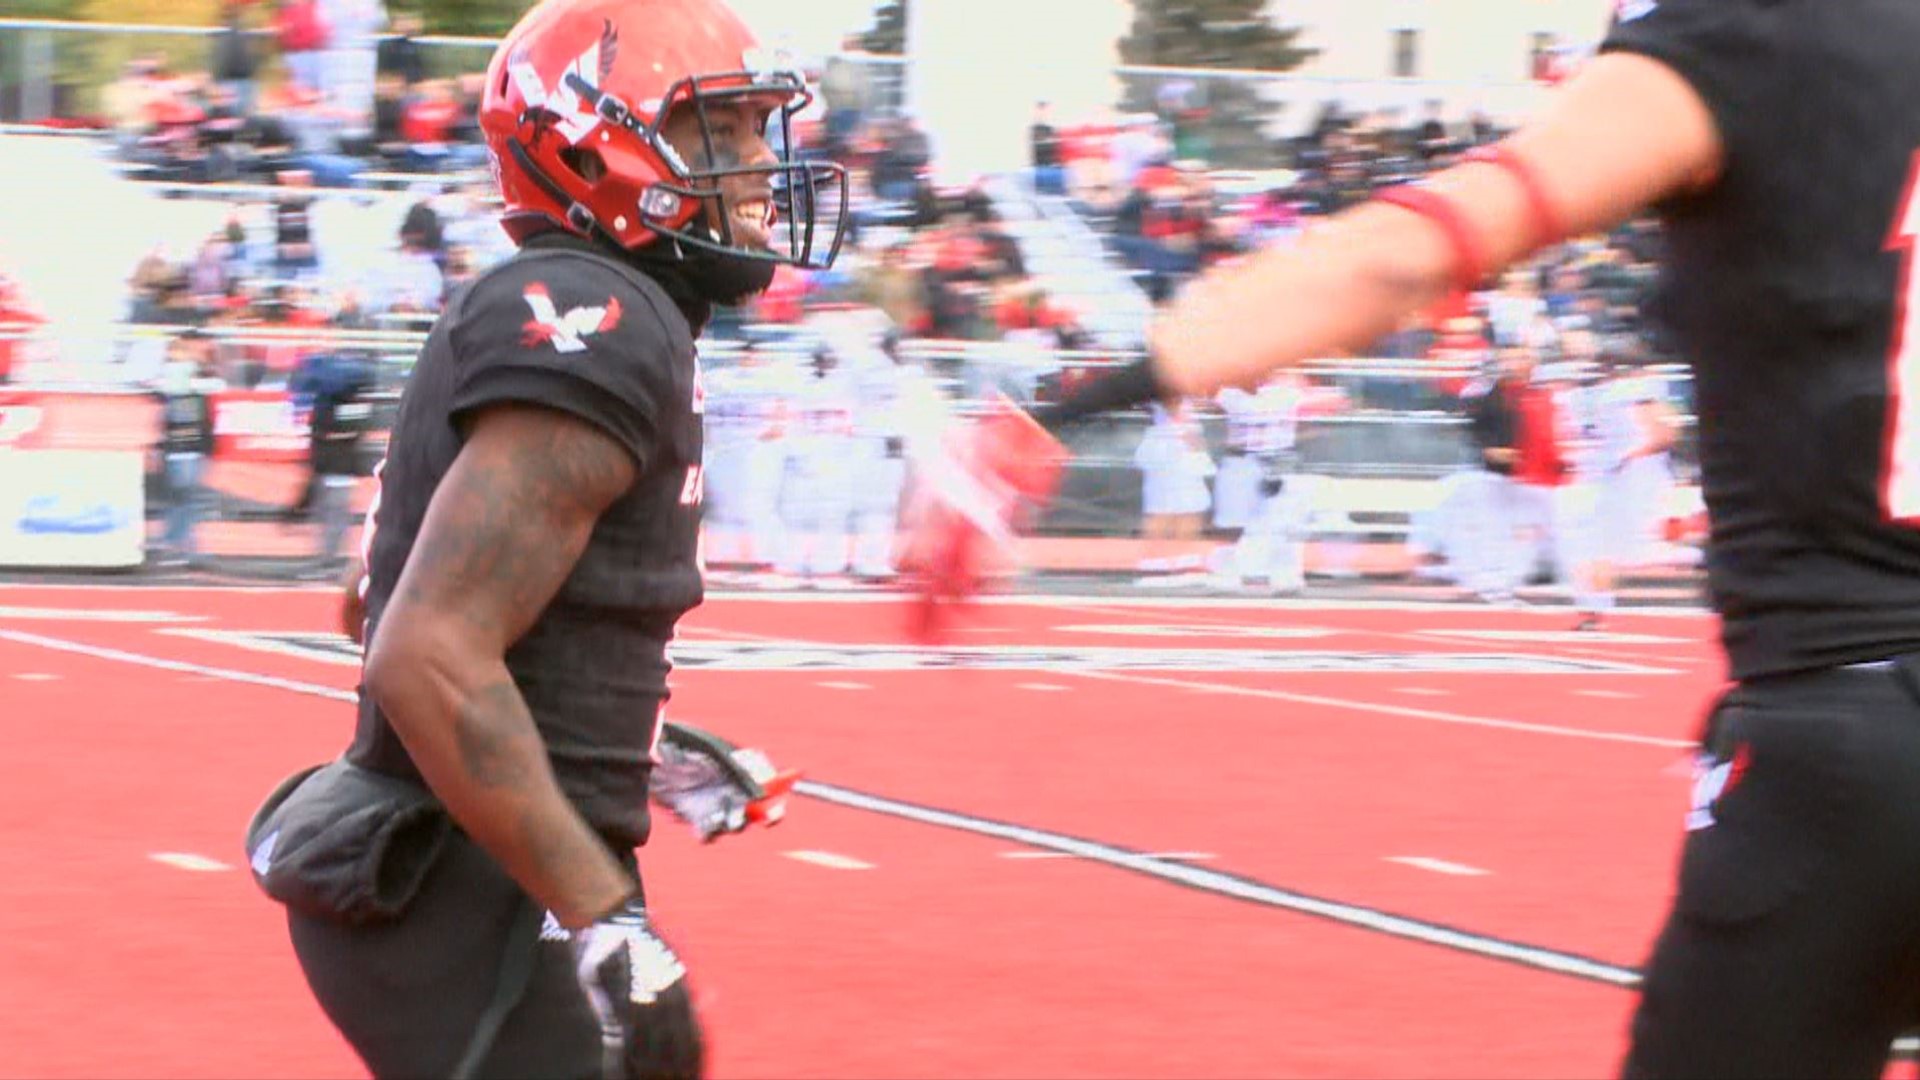 Barriere was relatively unknown last season. Then he led EWU to the national championship game.